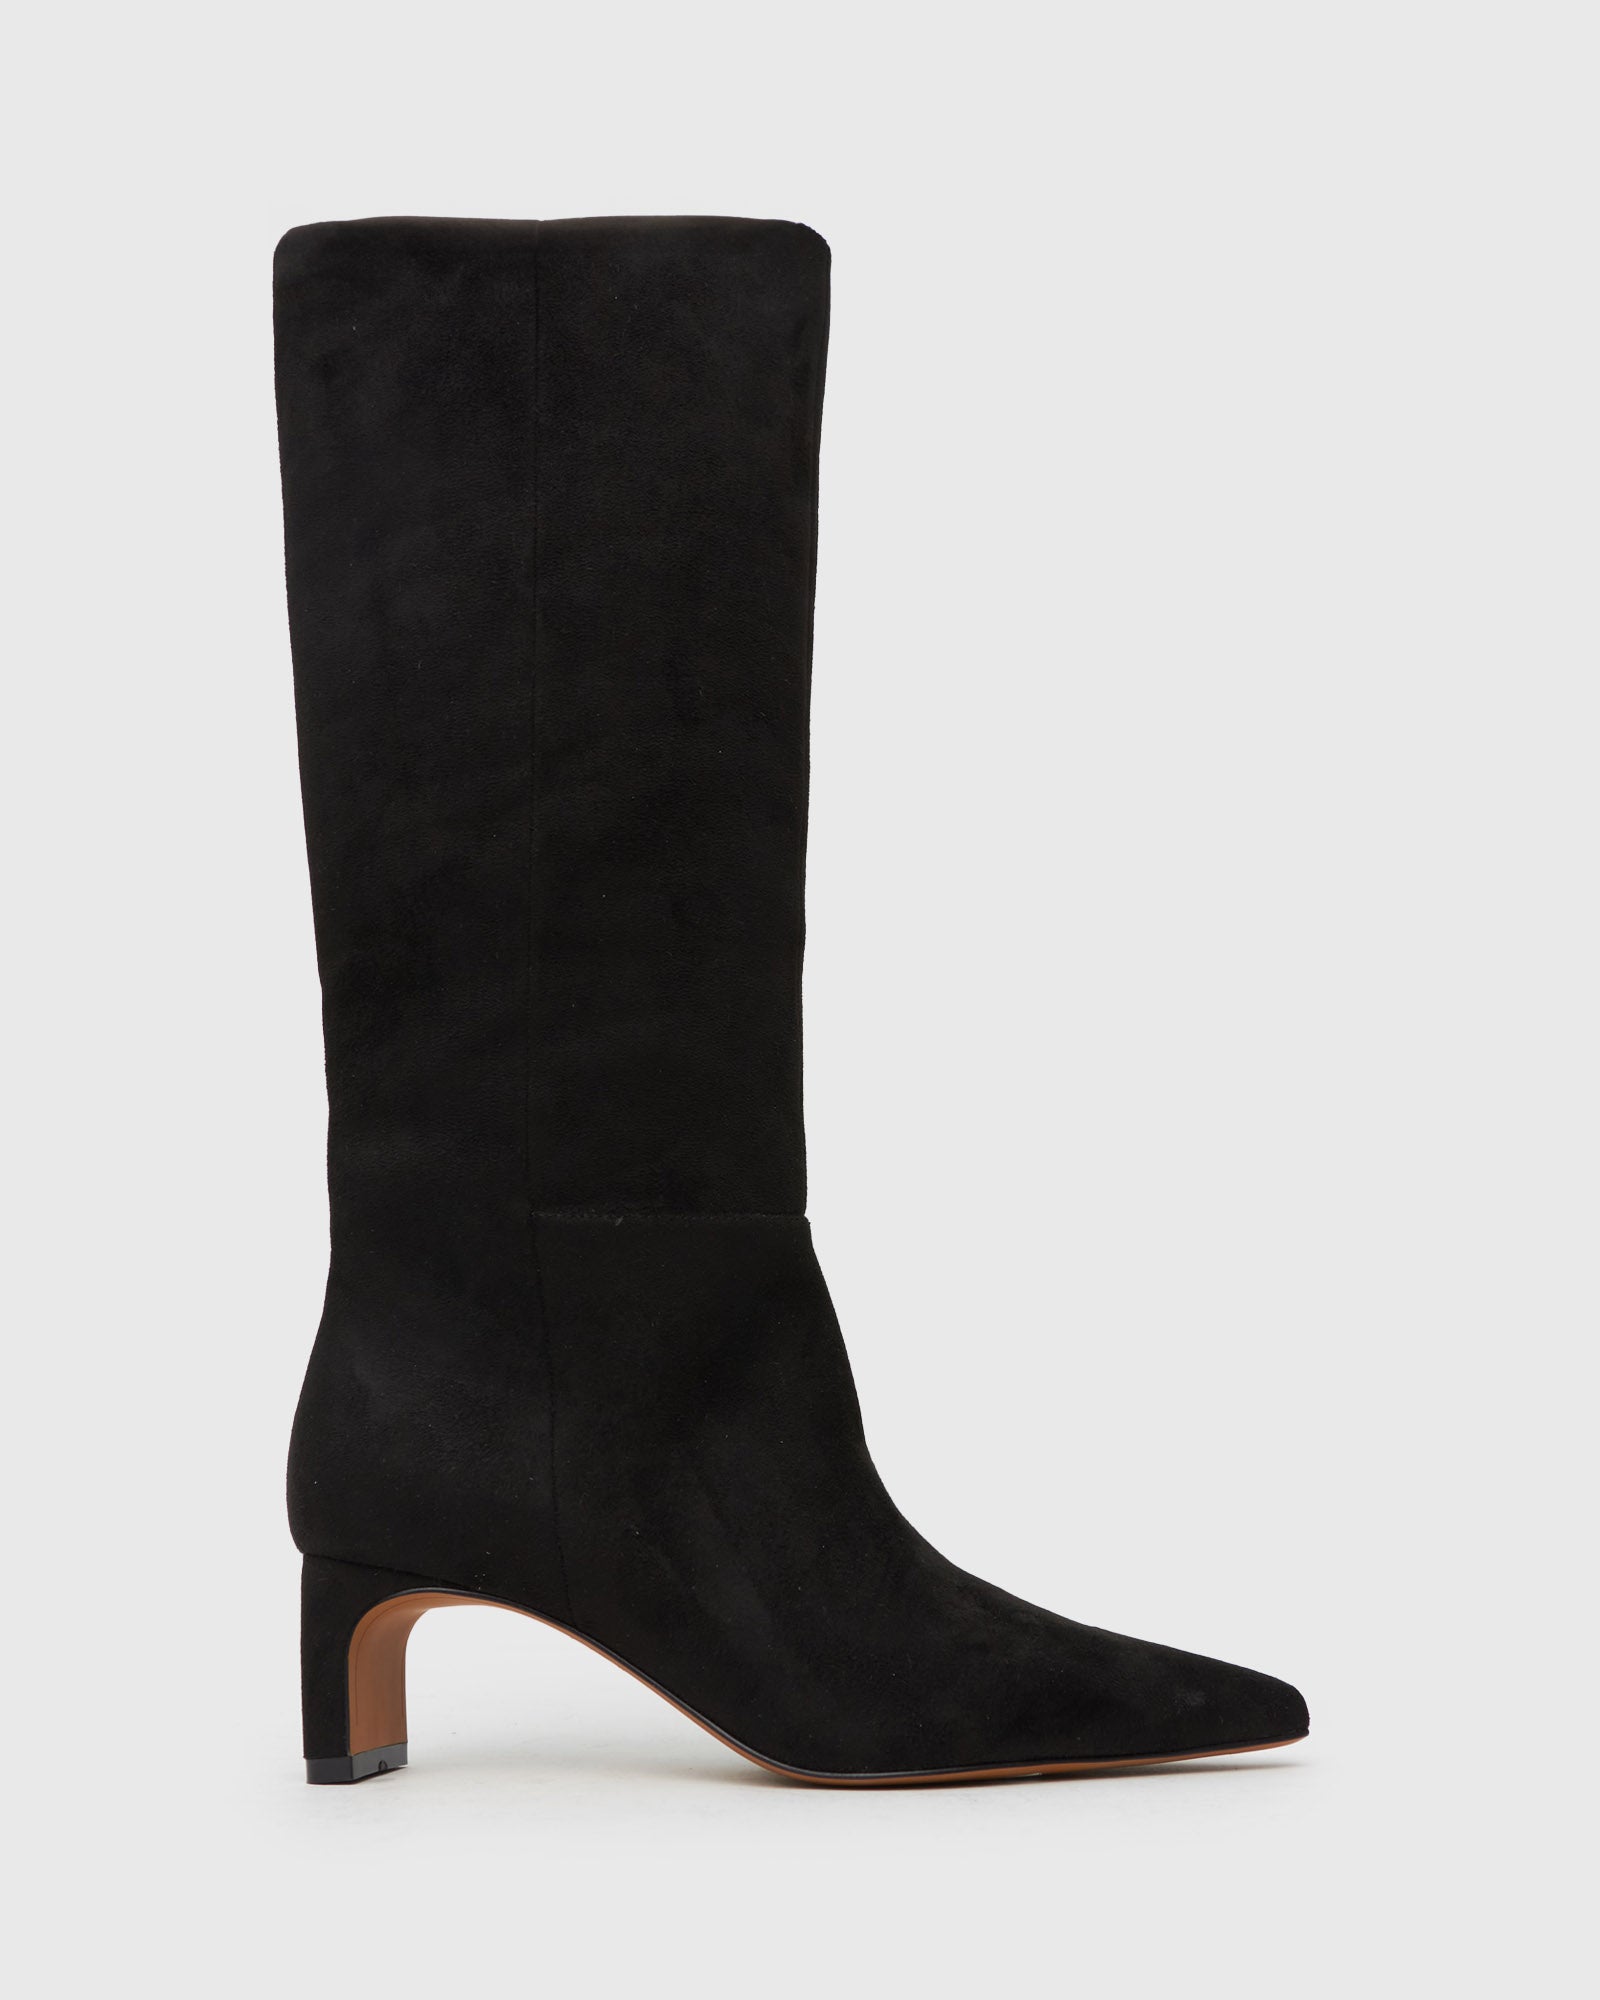 Buy ZIA Pull on Pointed Toe Boots by Betts online - Betts